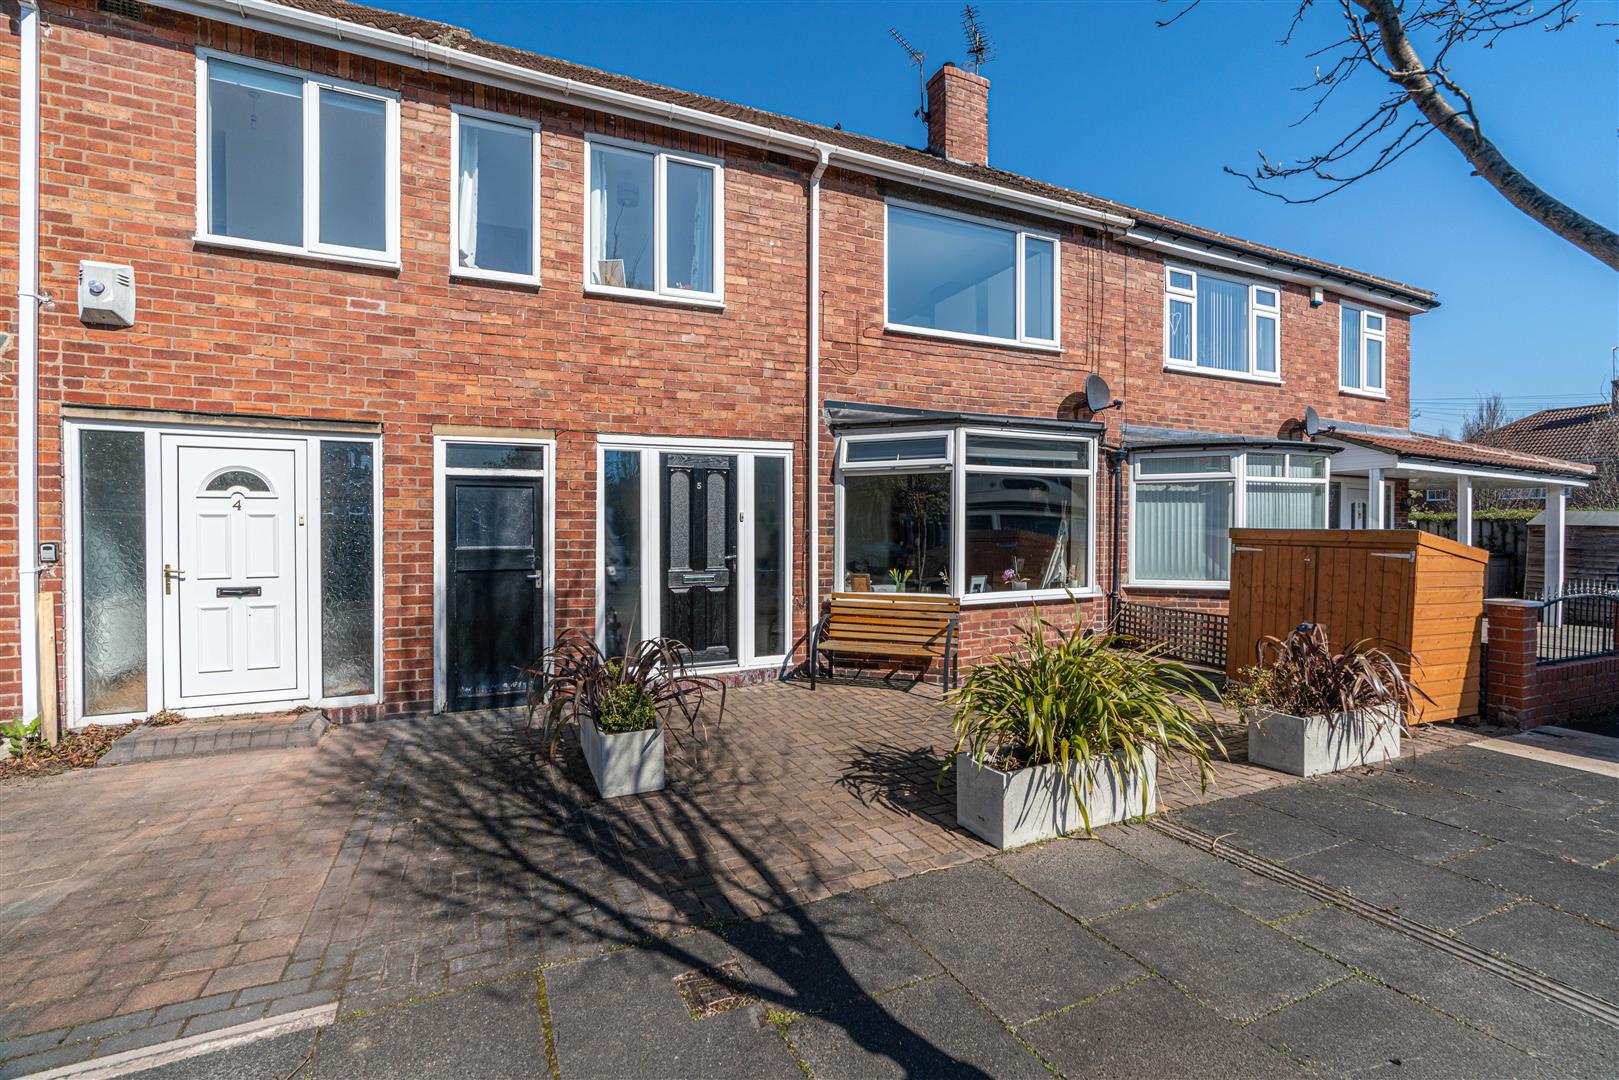 3 bed terraced house for sale in Grasmere Place, Gosforth - Property Image 1